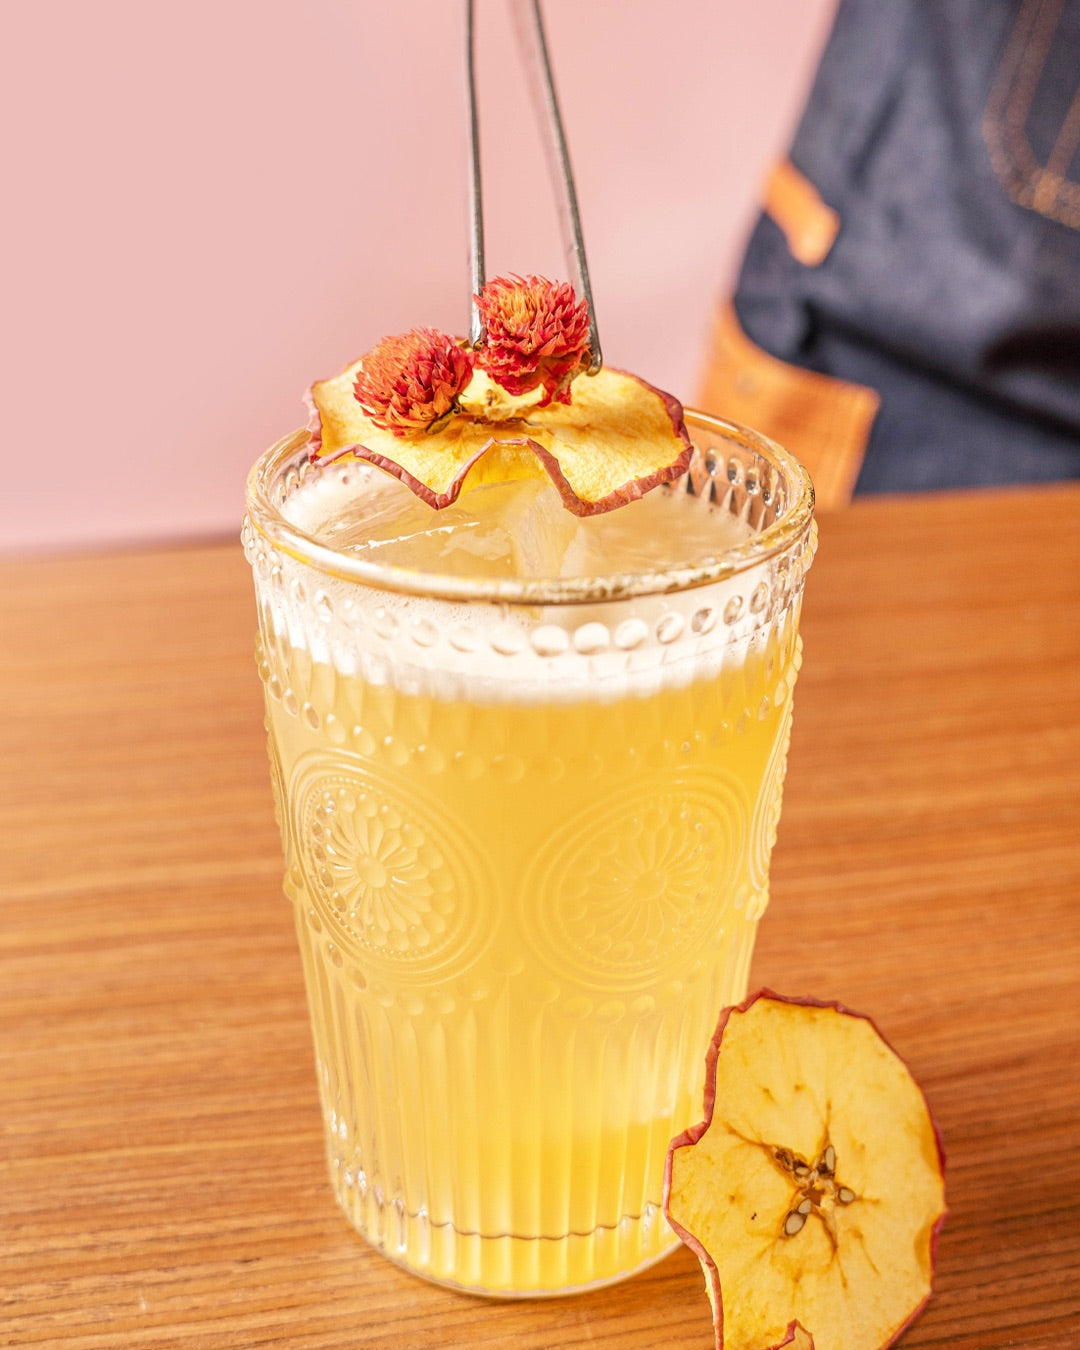 Sip into Spring: Welcome the Season with Refreshing Spring Sippers